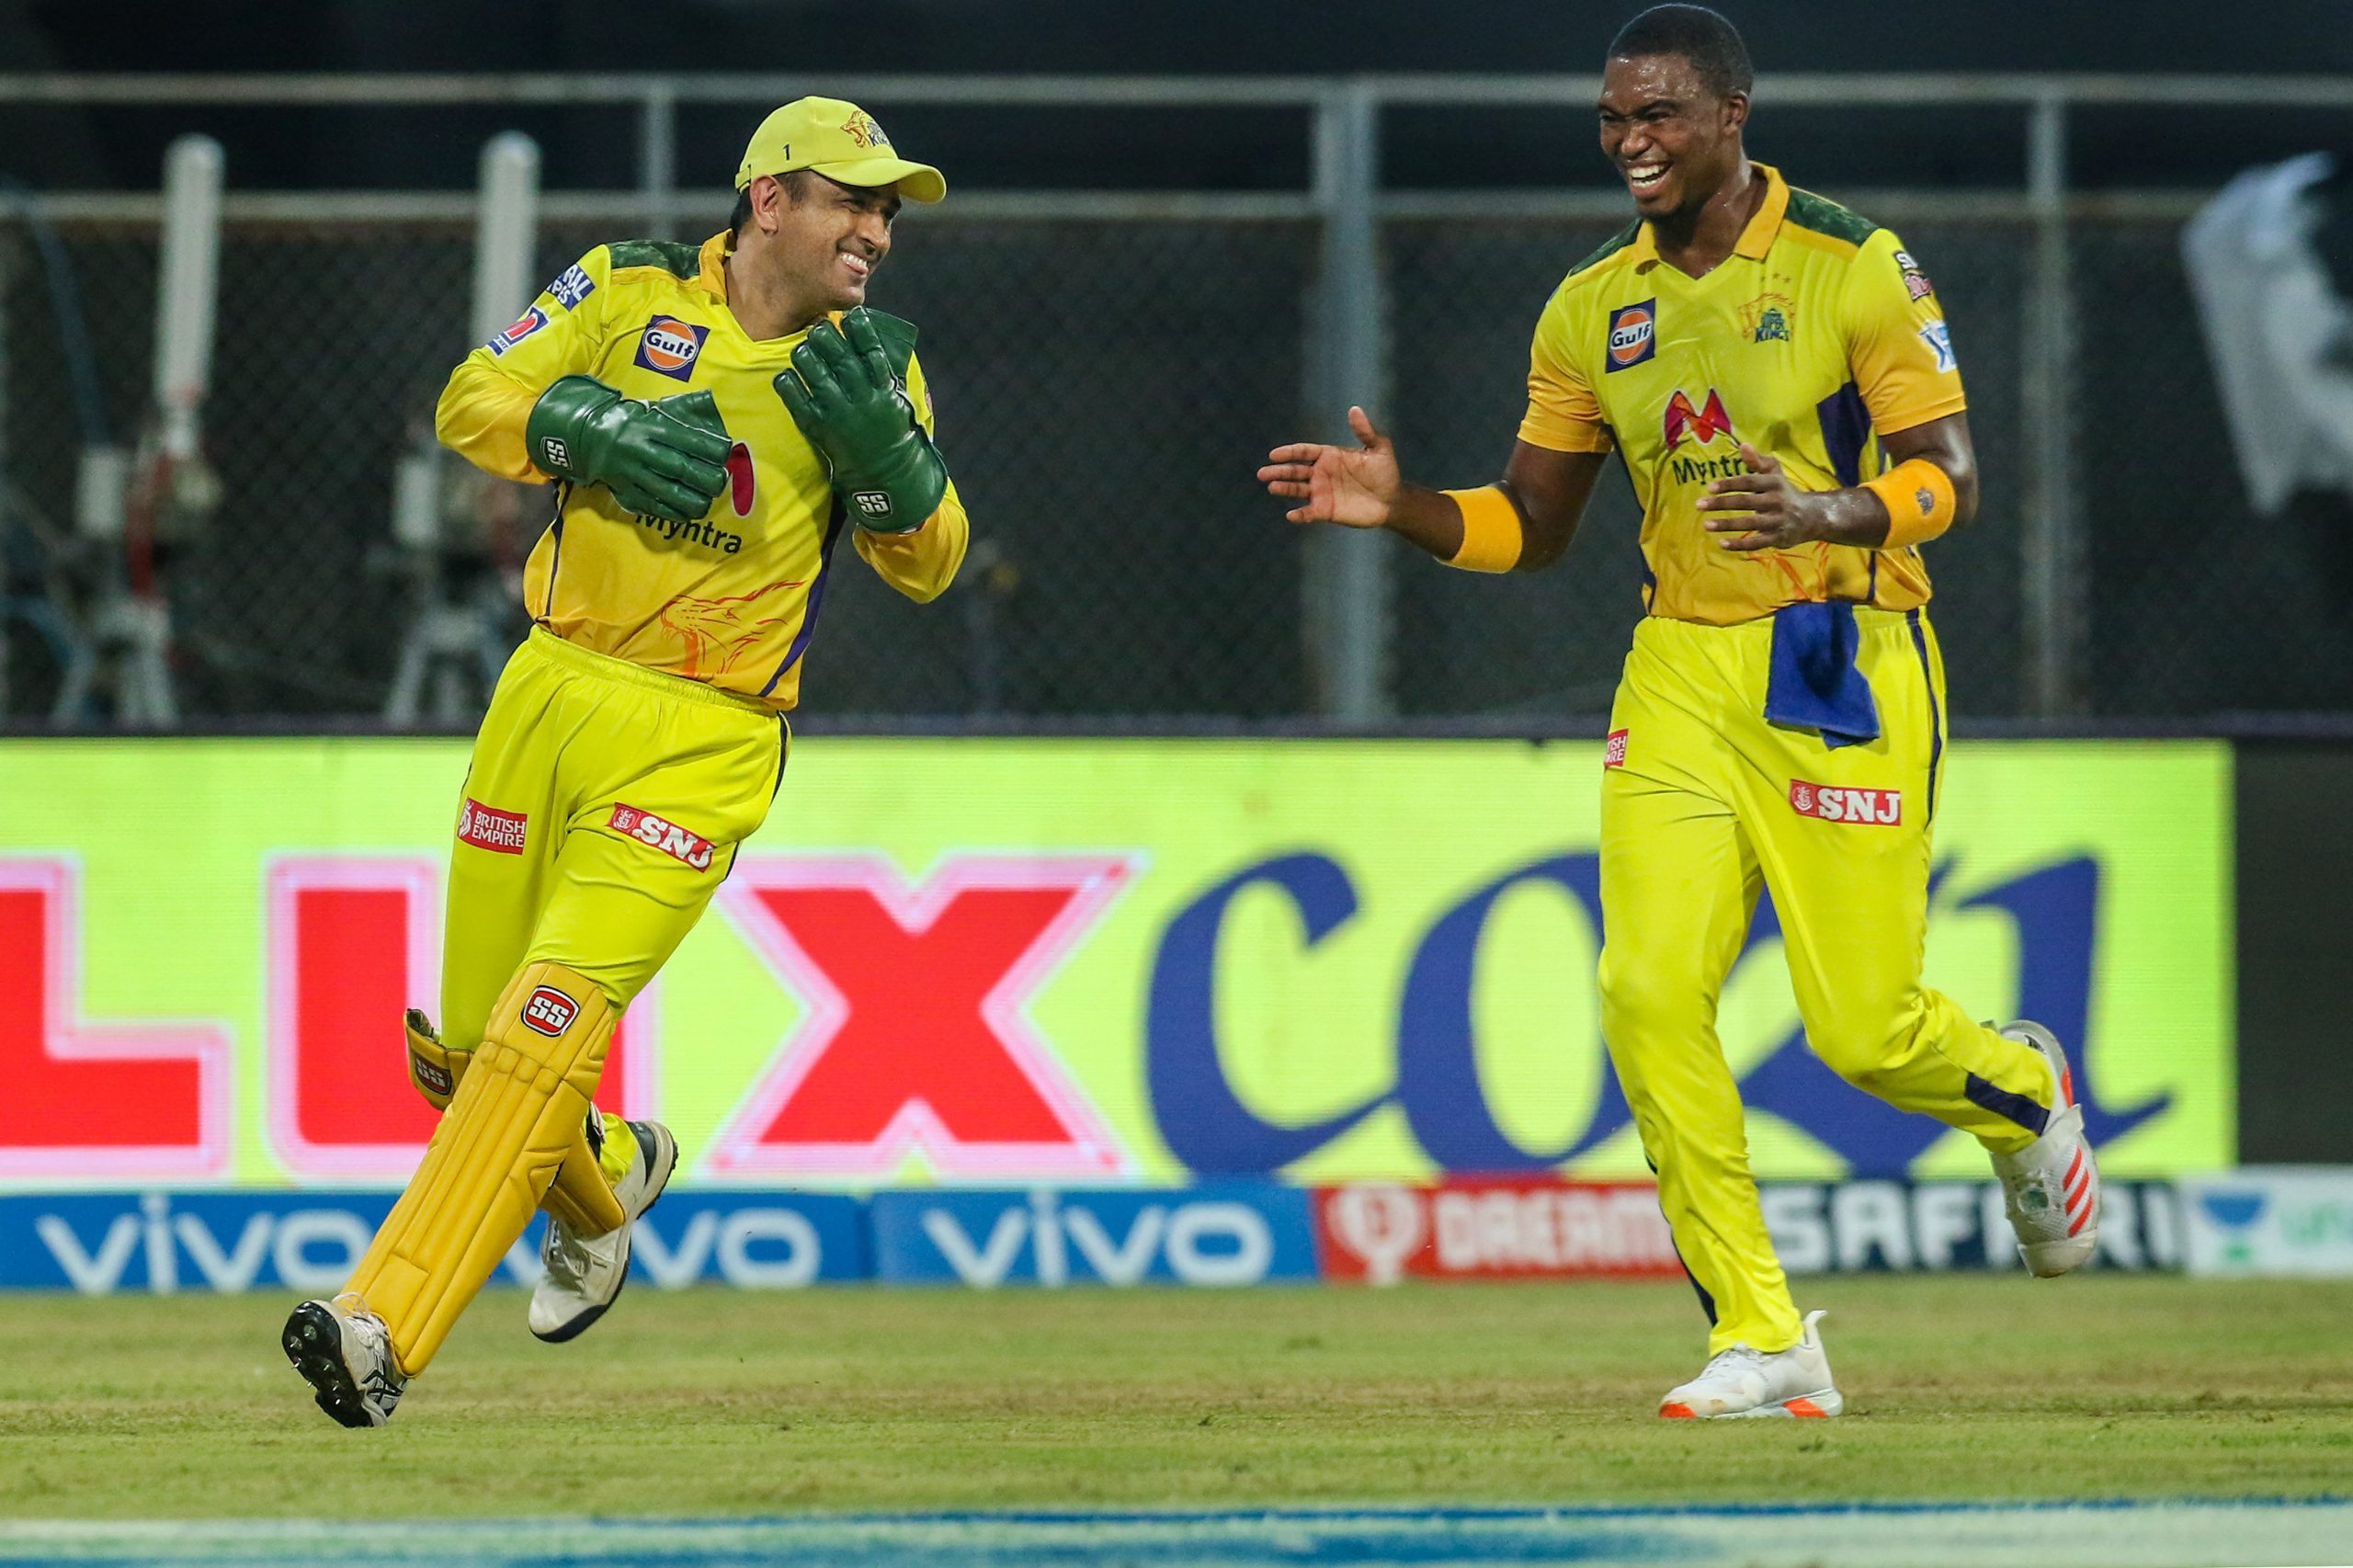 IPL 2021: CSK’s MS Dhoni wins toss, elects to bat against RCB